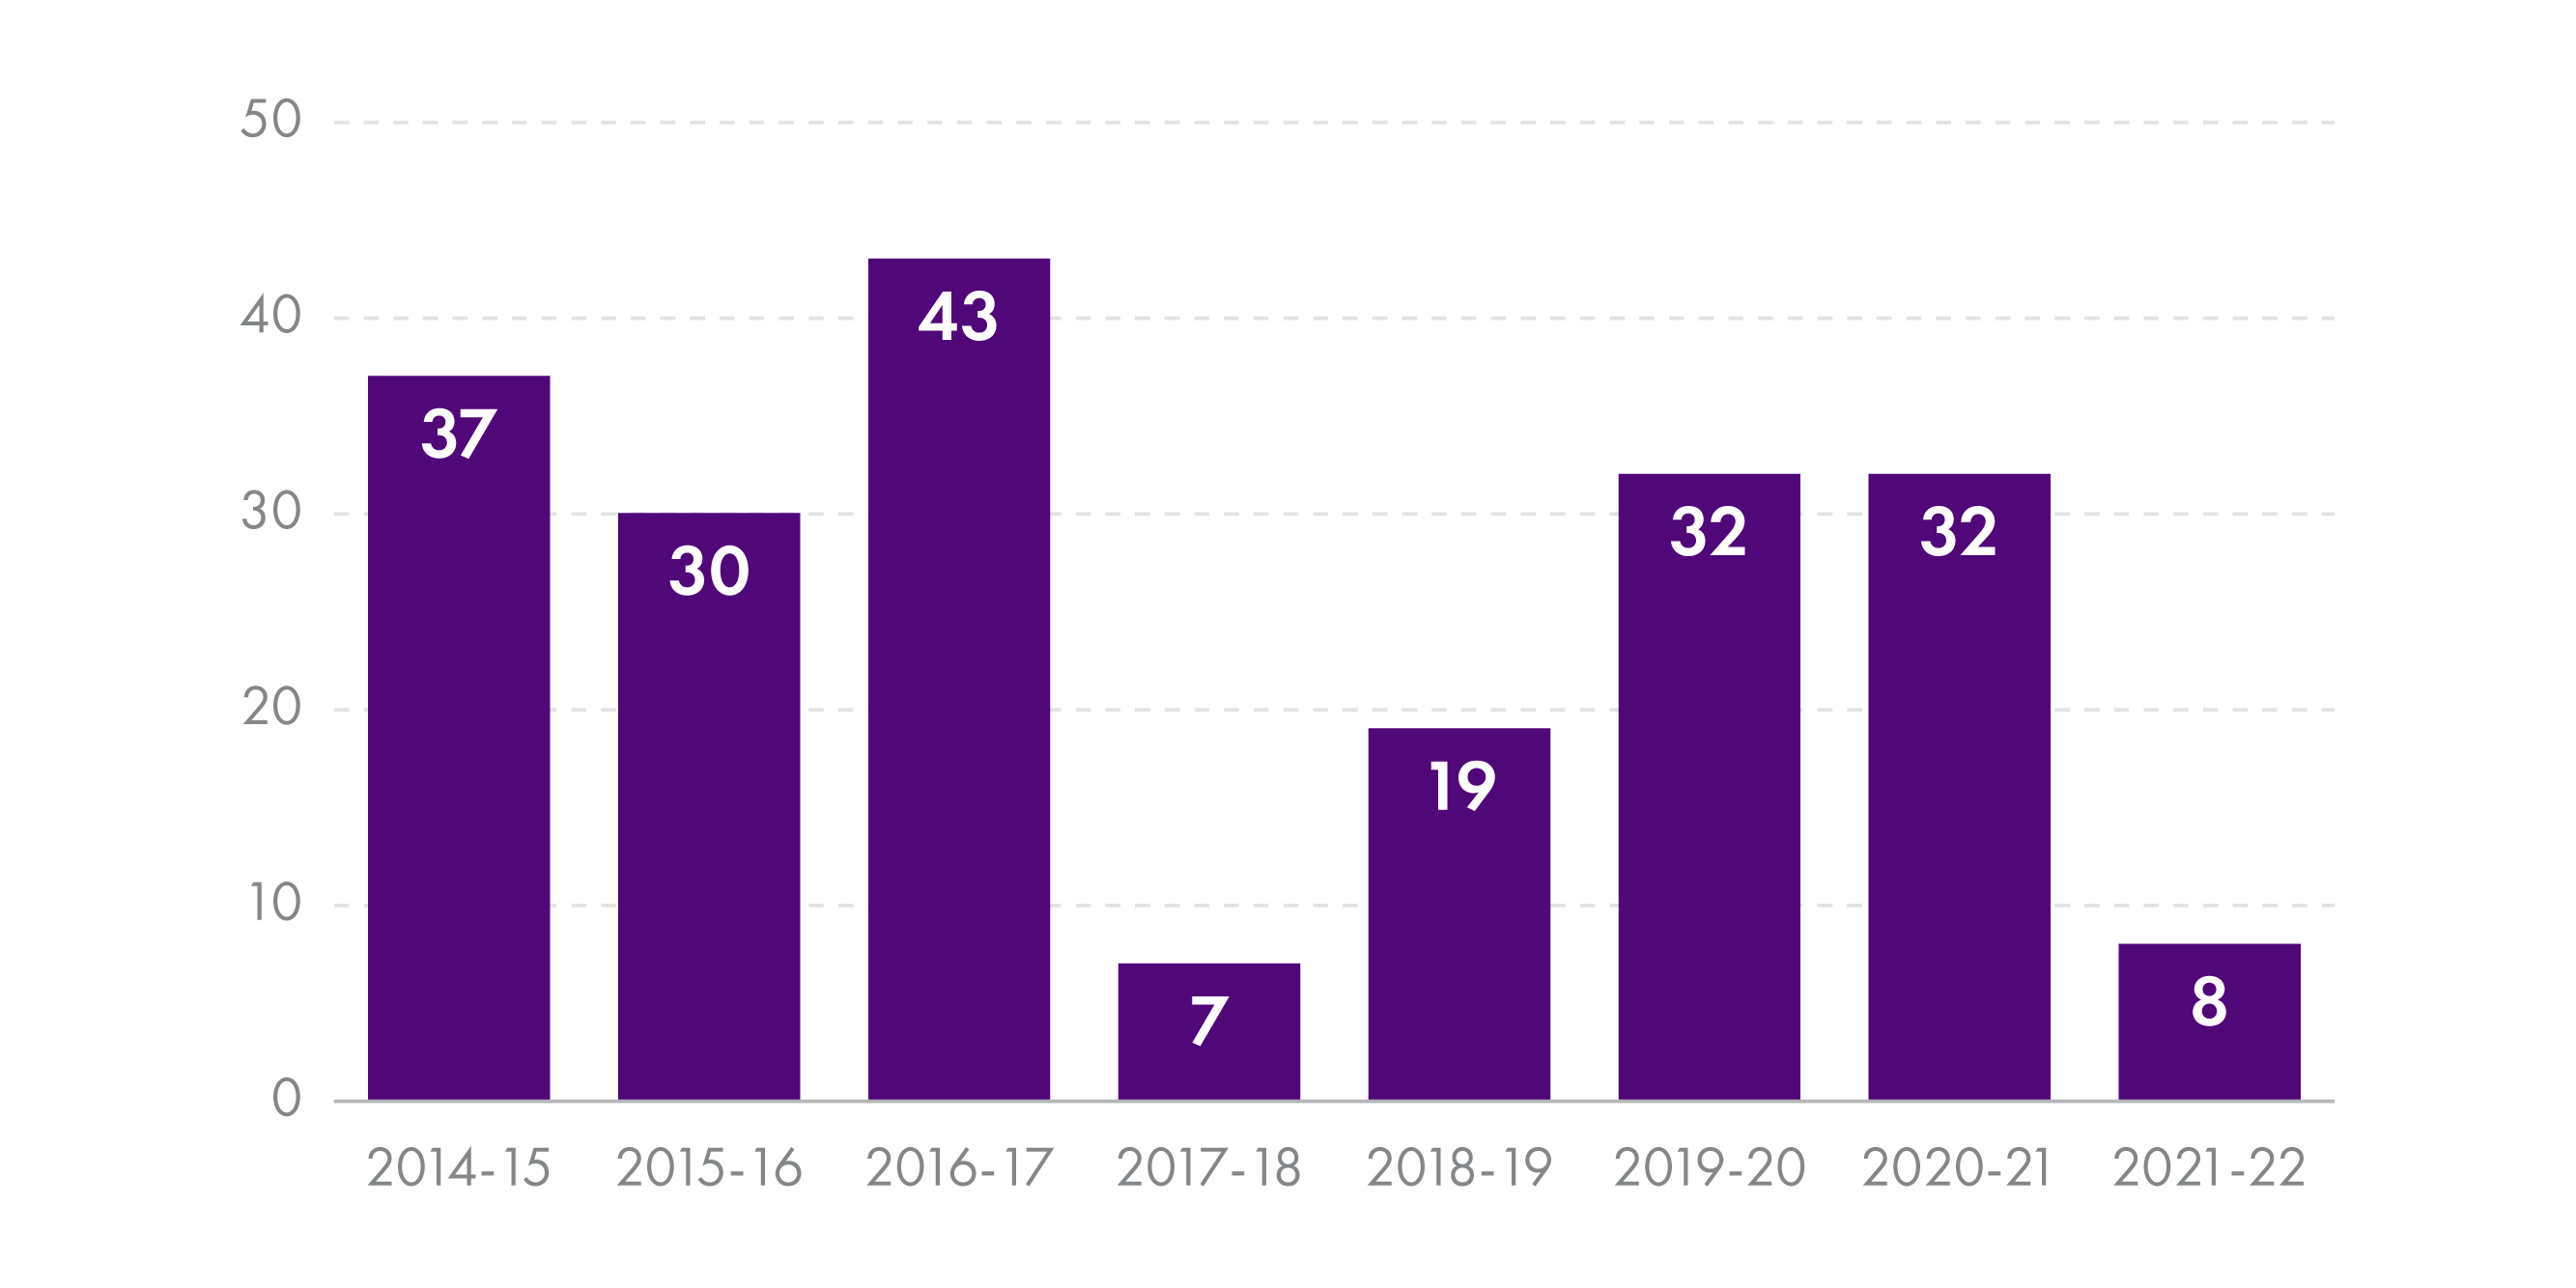 Bar graph showing the numbers of children committed or remanded to secure accommodation under Section 51 of the Criminal Procedure (Scotland) Act 1995 from 2014/15 to 2021/22.